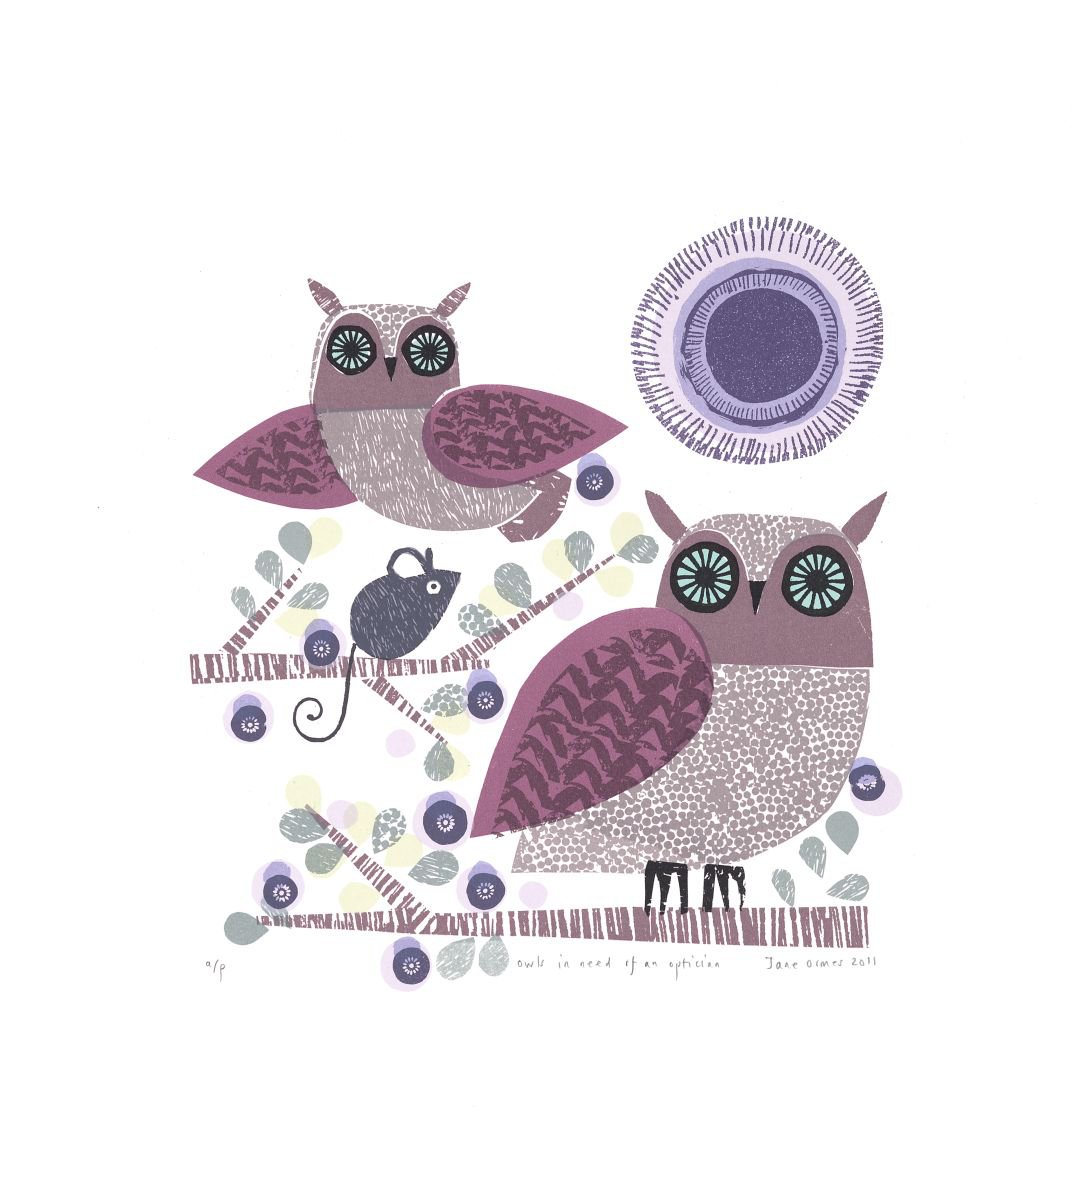 Owls in need of an optician by Jane Ormes